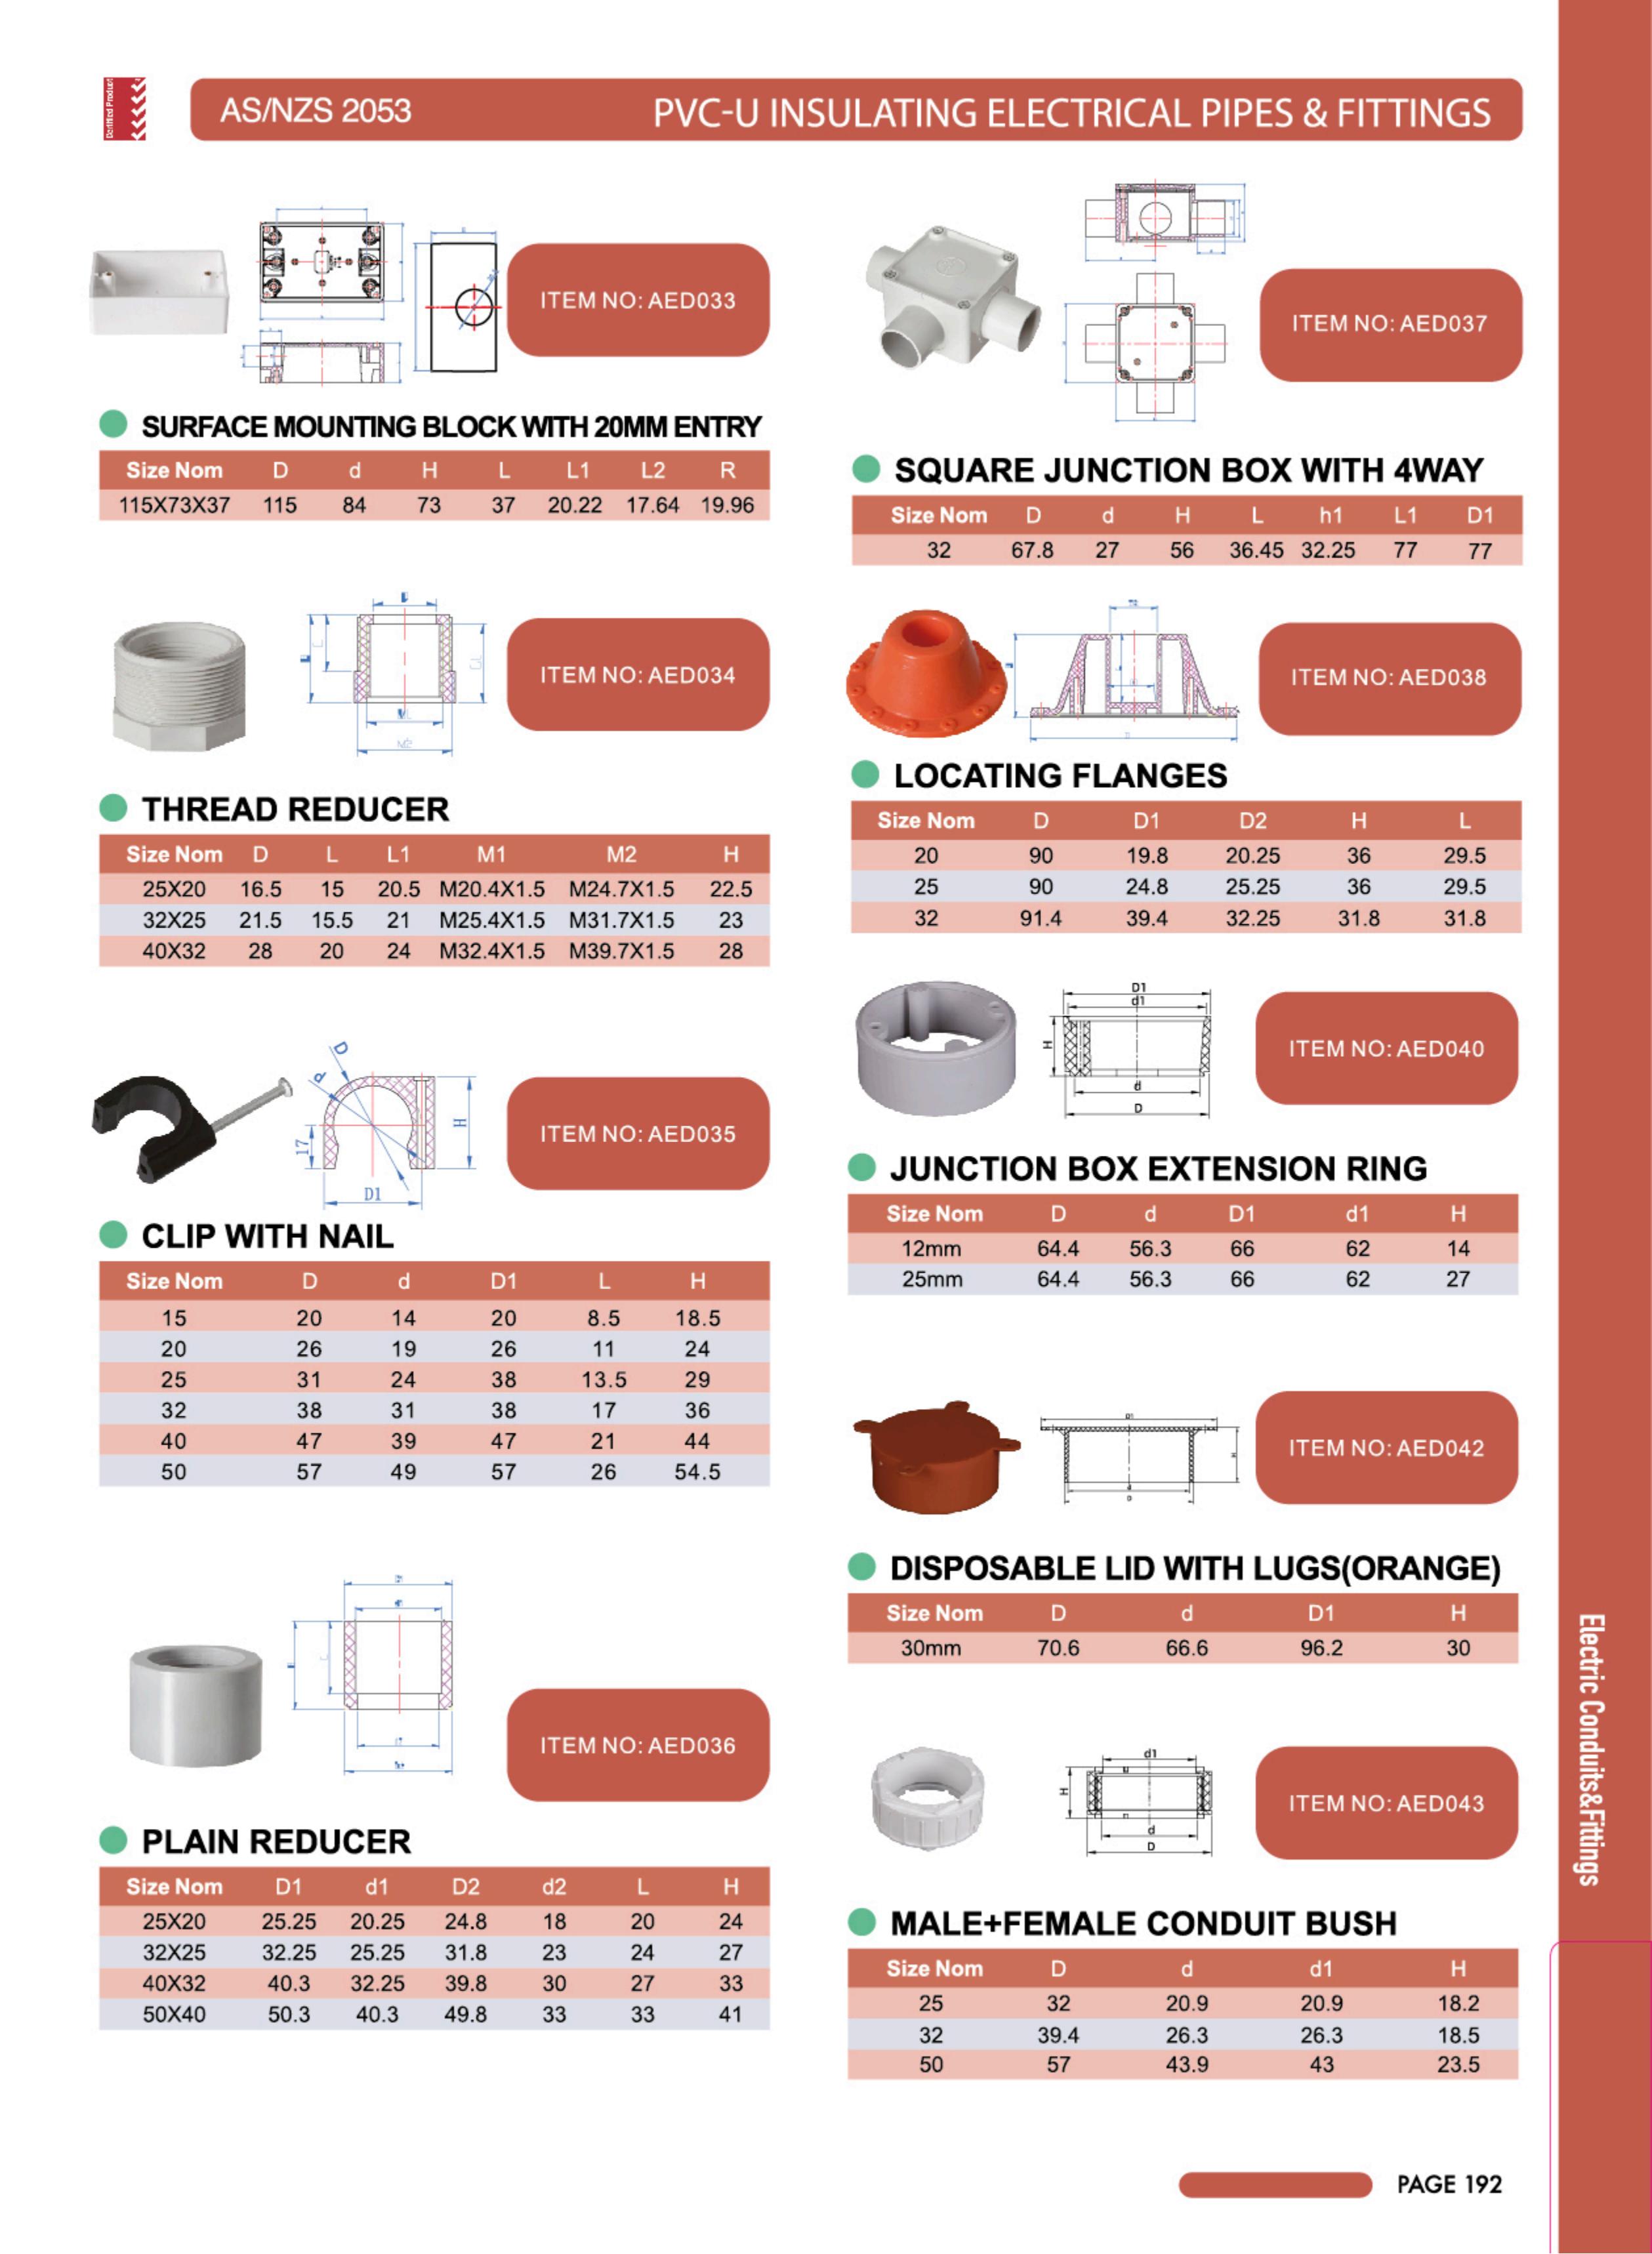 INSULATING ELECTRICAL CONDUITS AND FITTINGS 5